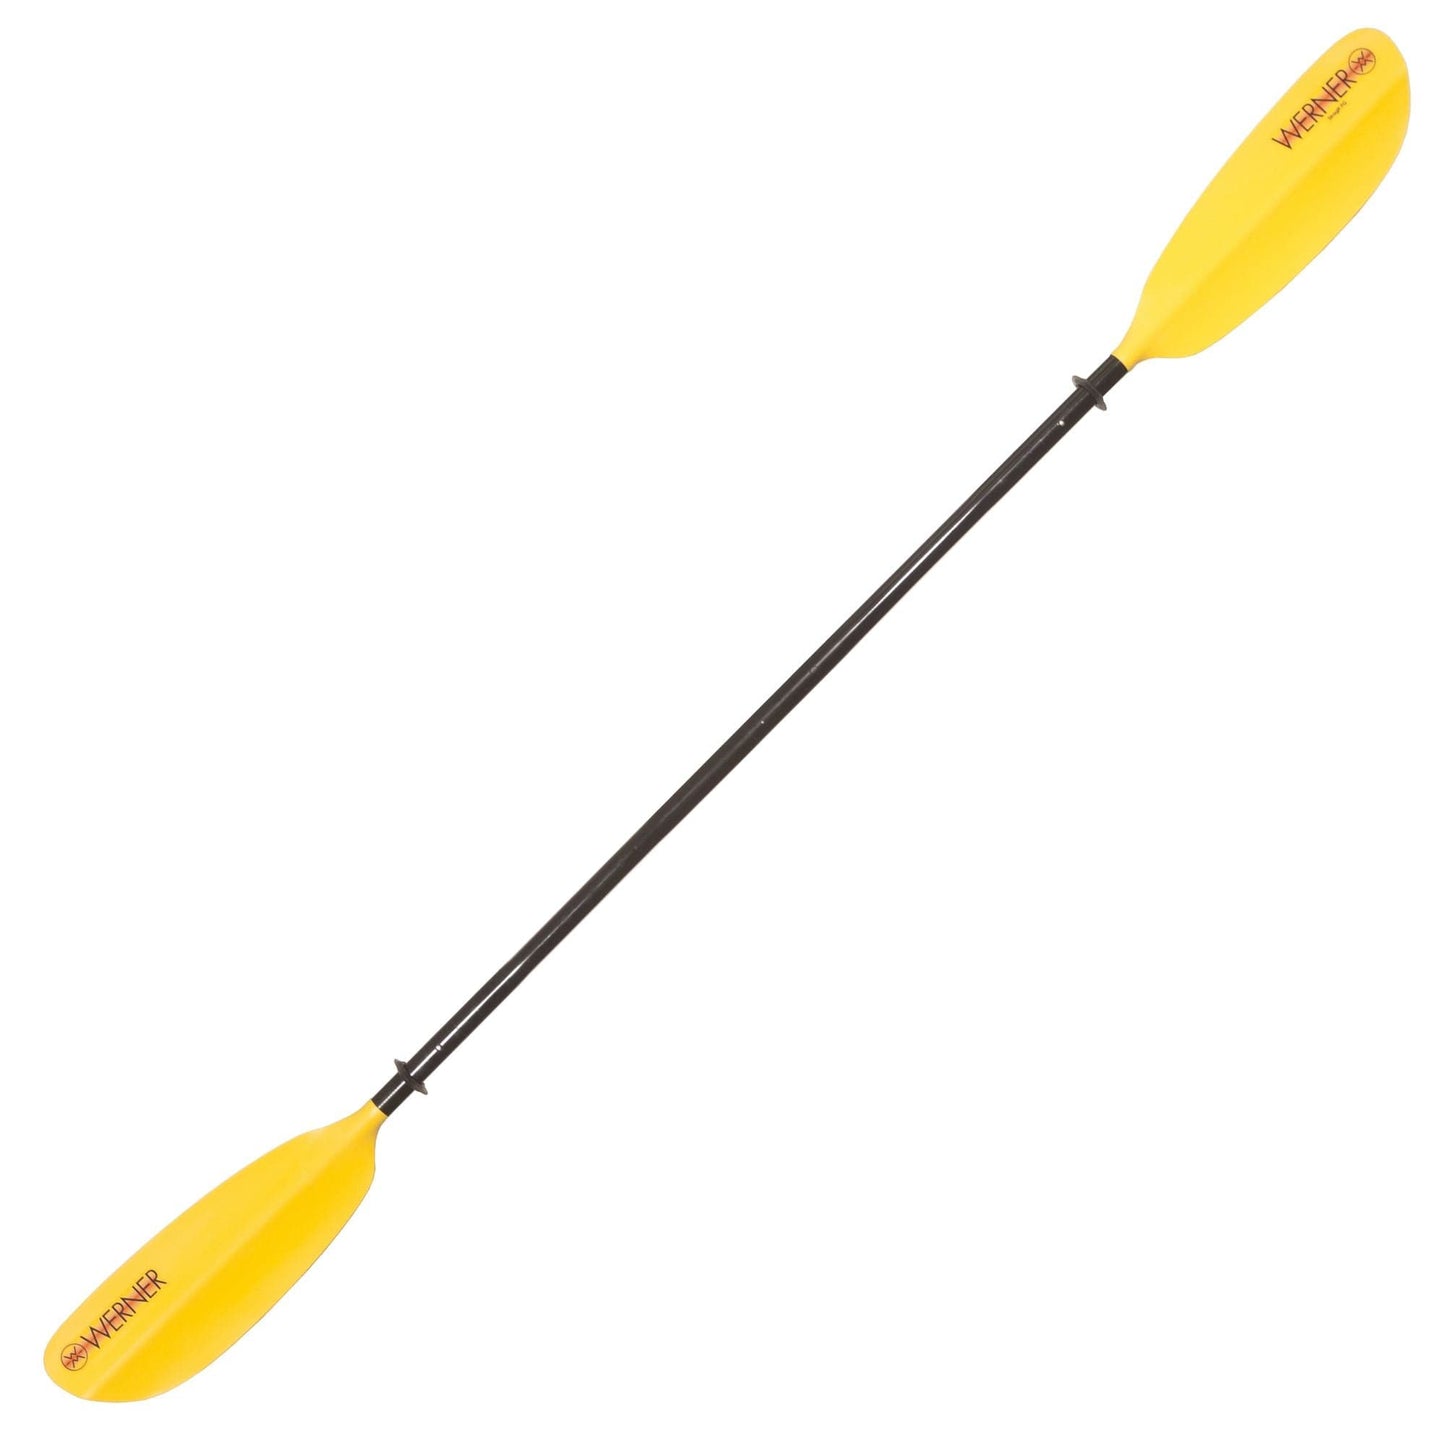 Featuring the Skagit FG fishing kayak paddle, fishing paddle, touring / rec paddle manufactured by Werner shown here from a second angle.